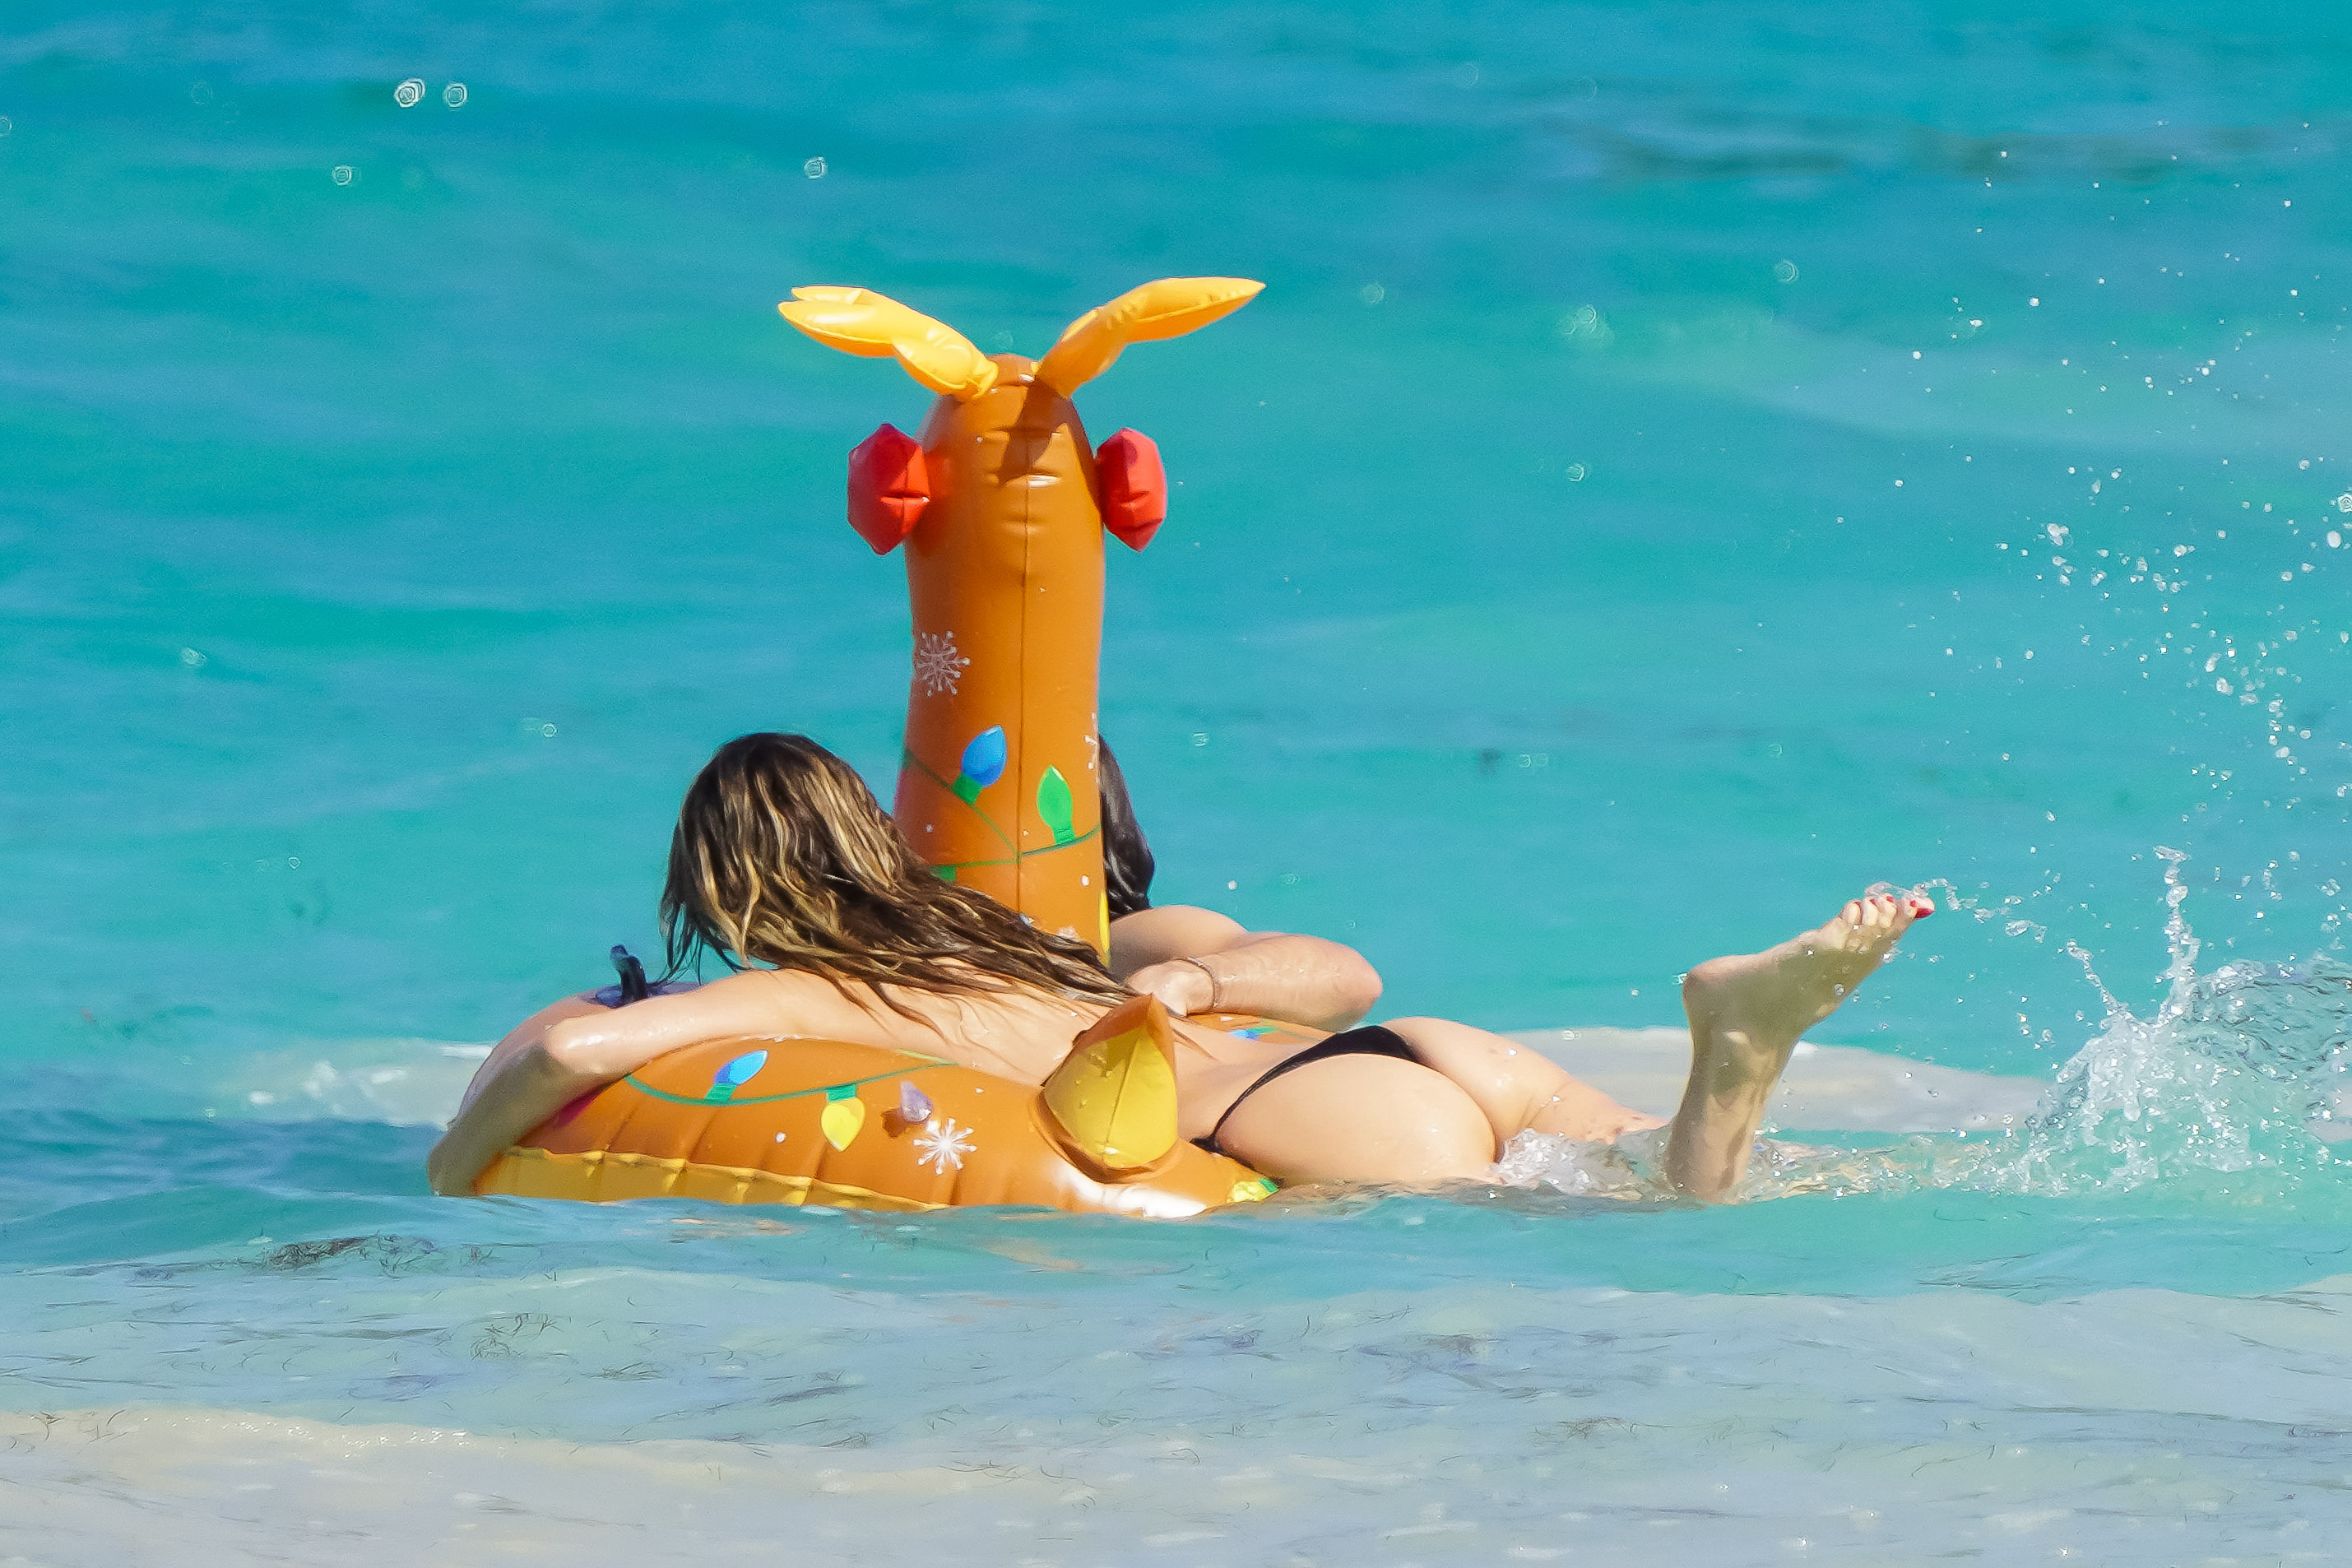 Heidi Klum showed off her bare butt while on the inflatable reindeer